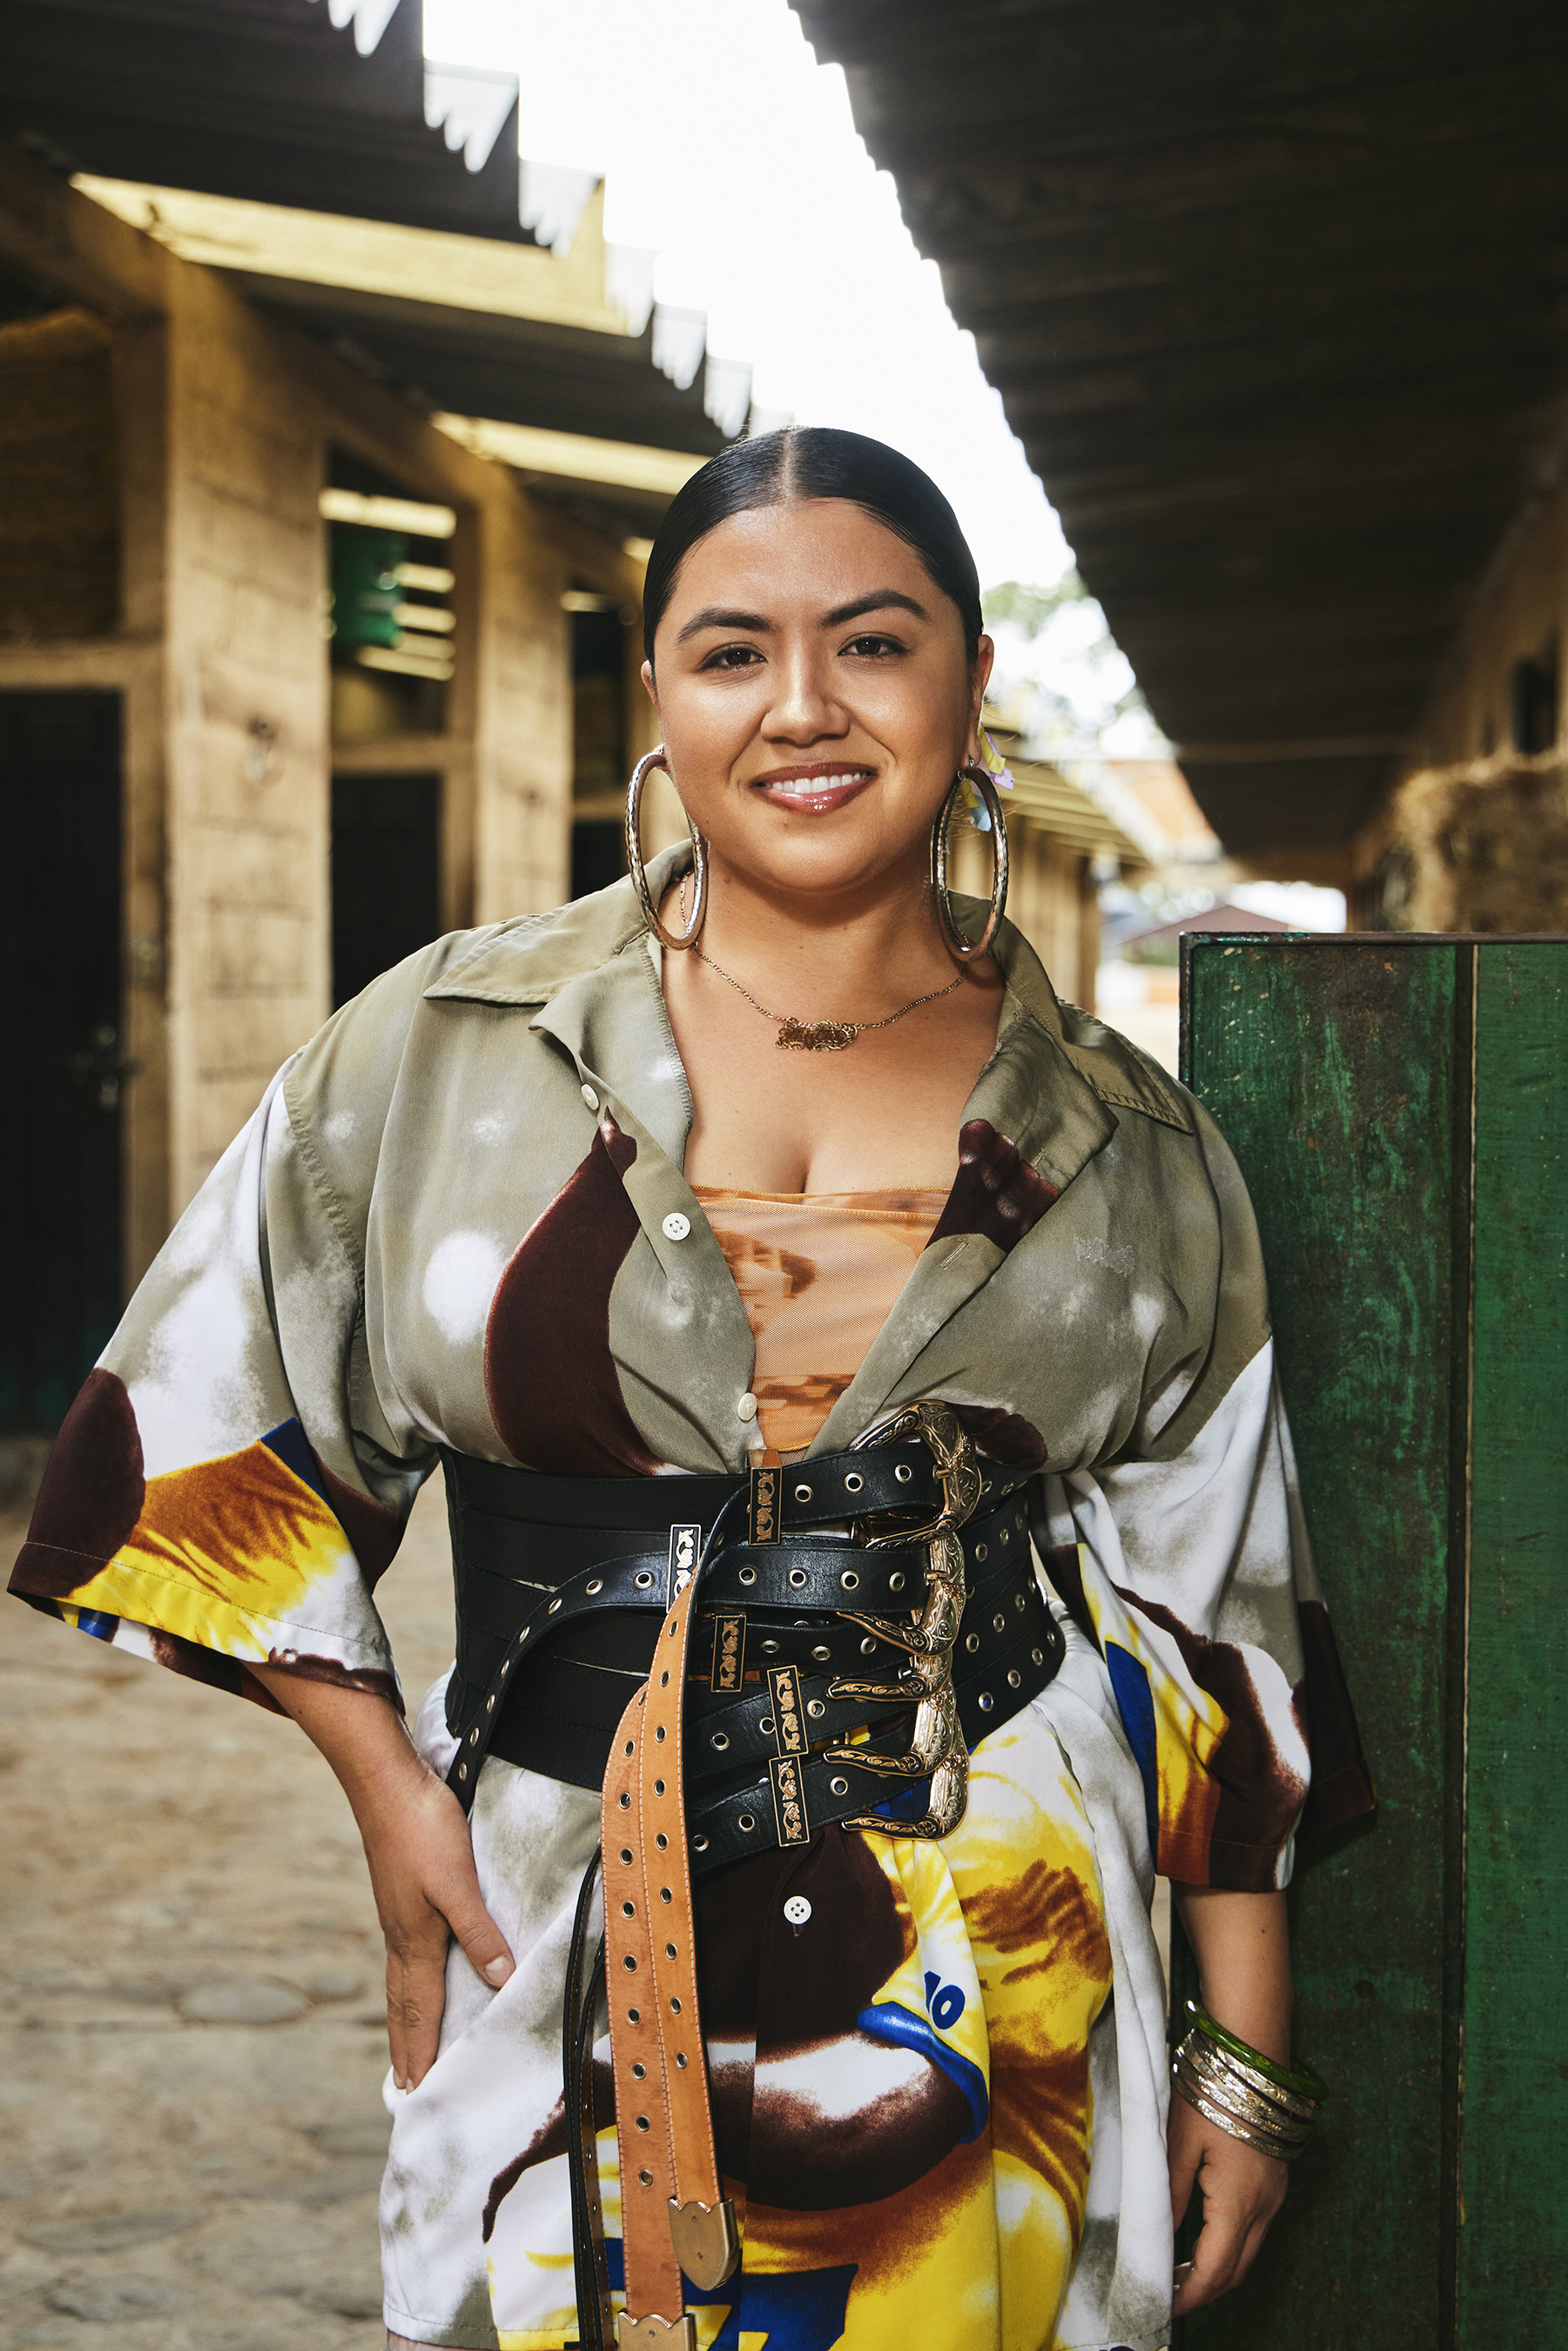 Mexican-American Photographer, Thalia Gochez captured stills that represent the magnificent culture of Mexico for the stunning OOH campaign Mexican-American Photographer